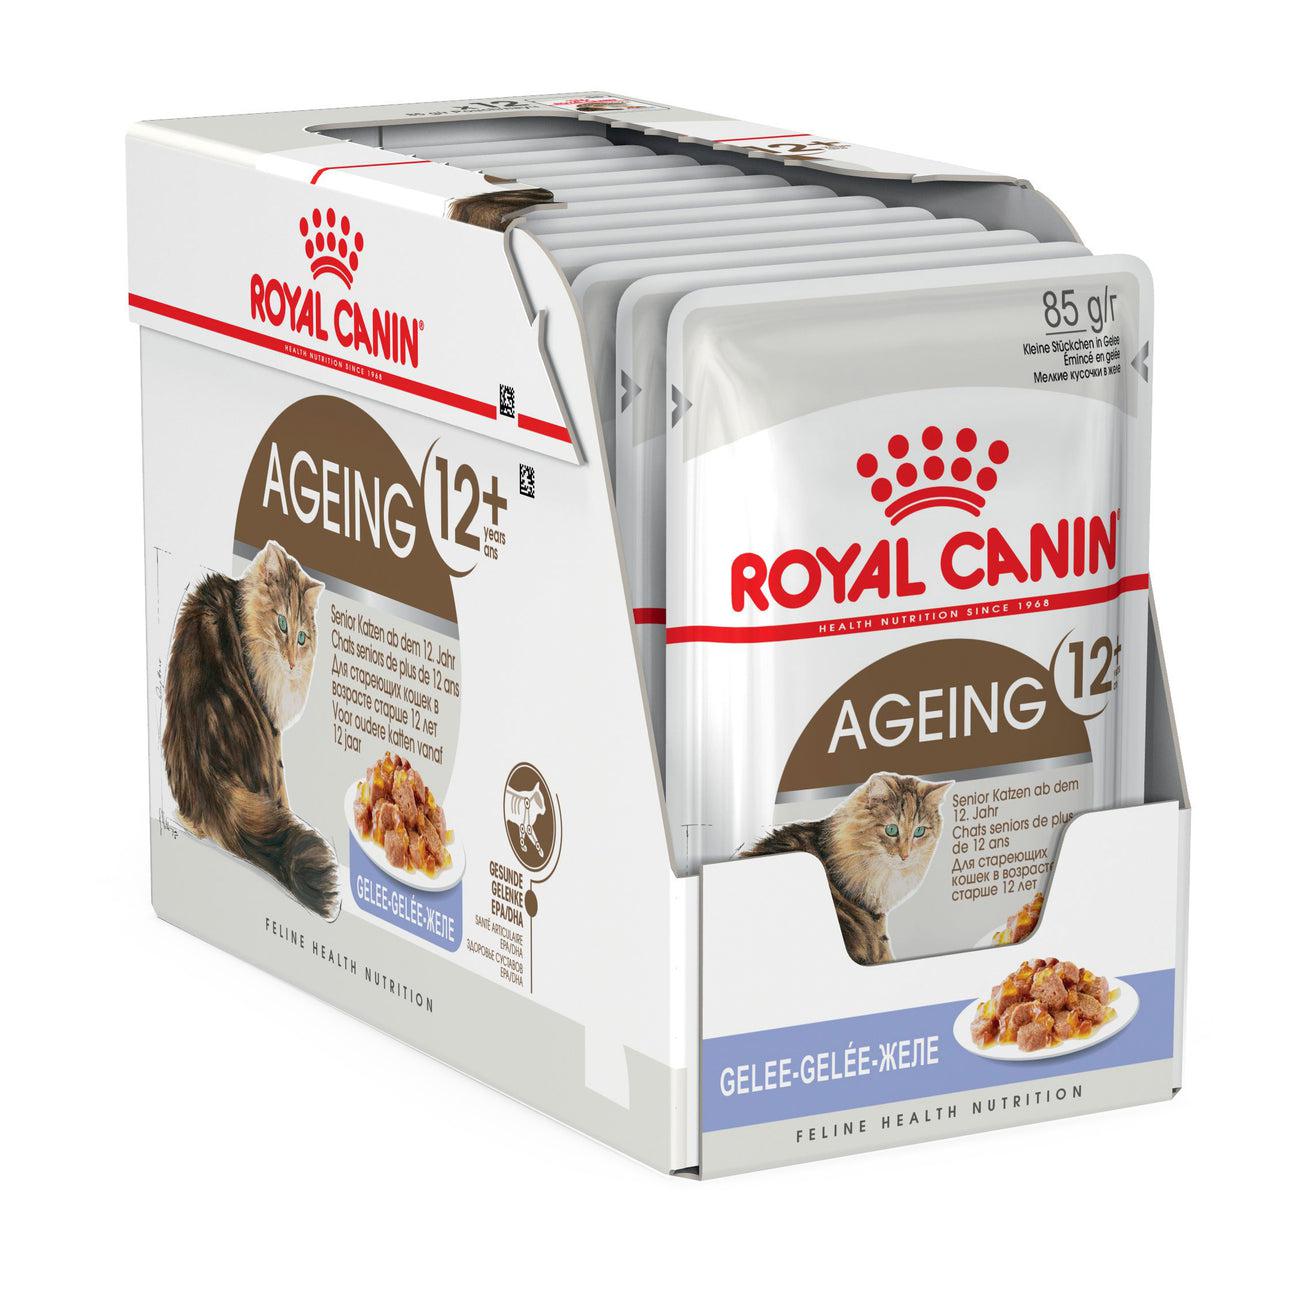 Royal Canin Feline Health Nutrition Ageing +12 Jelly Wet Food Pouch, 85g